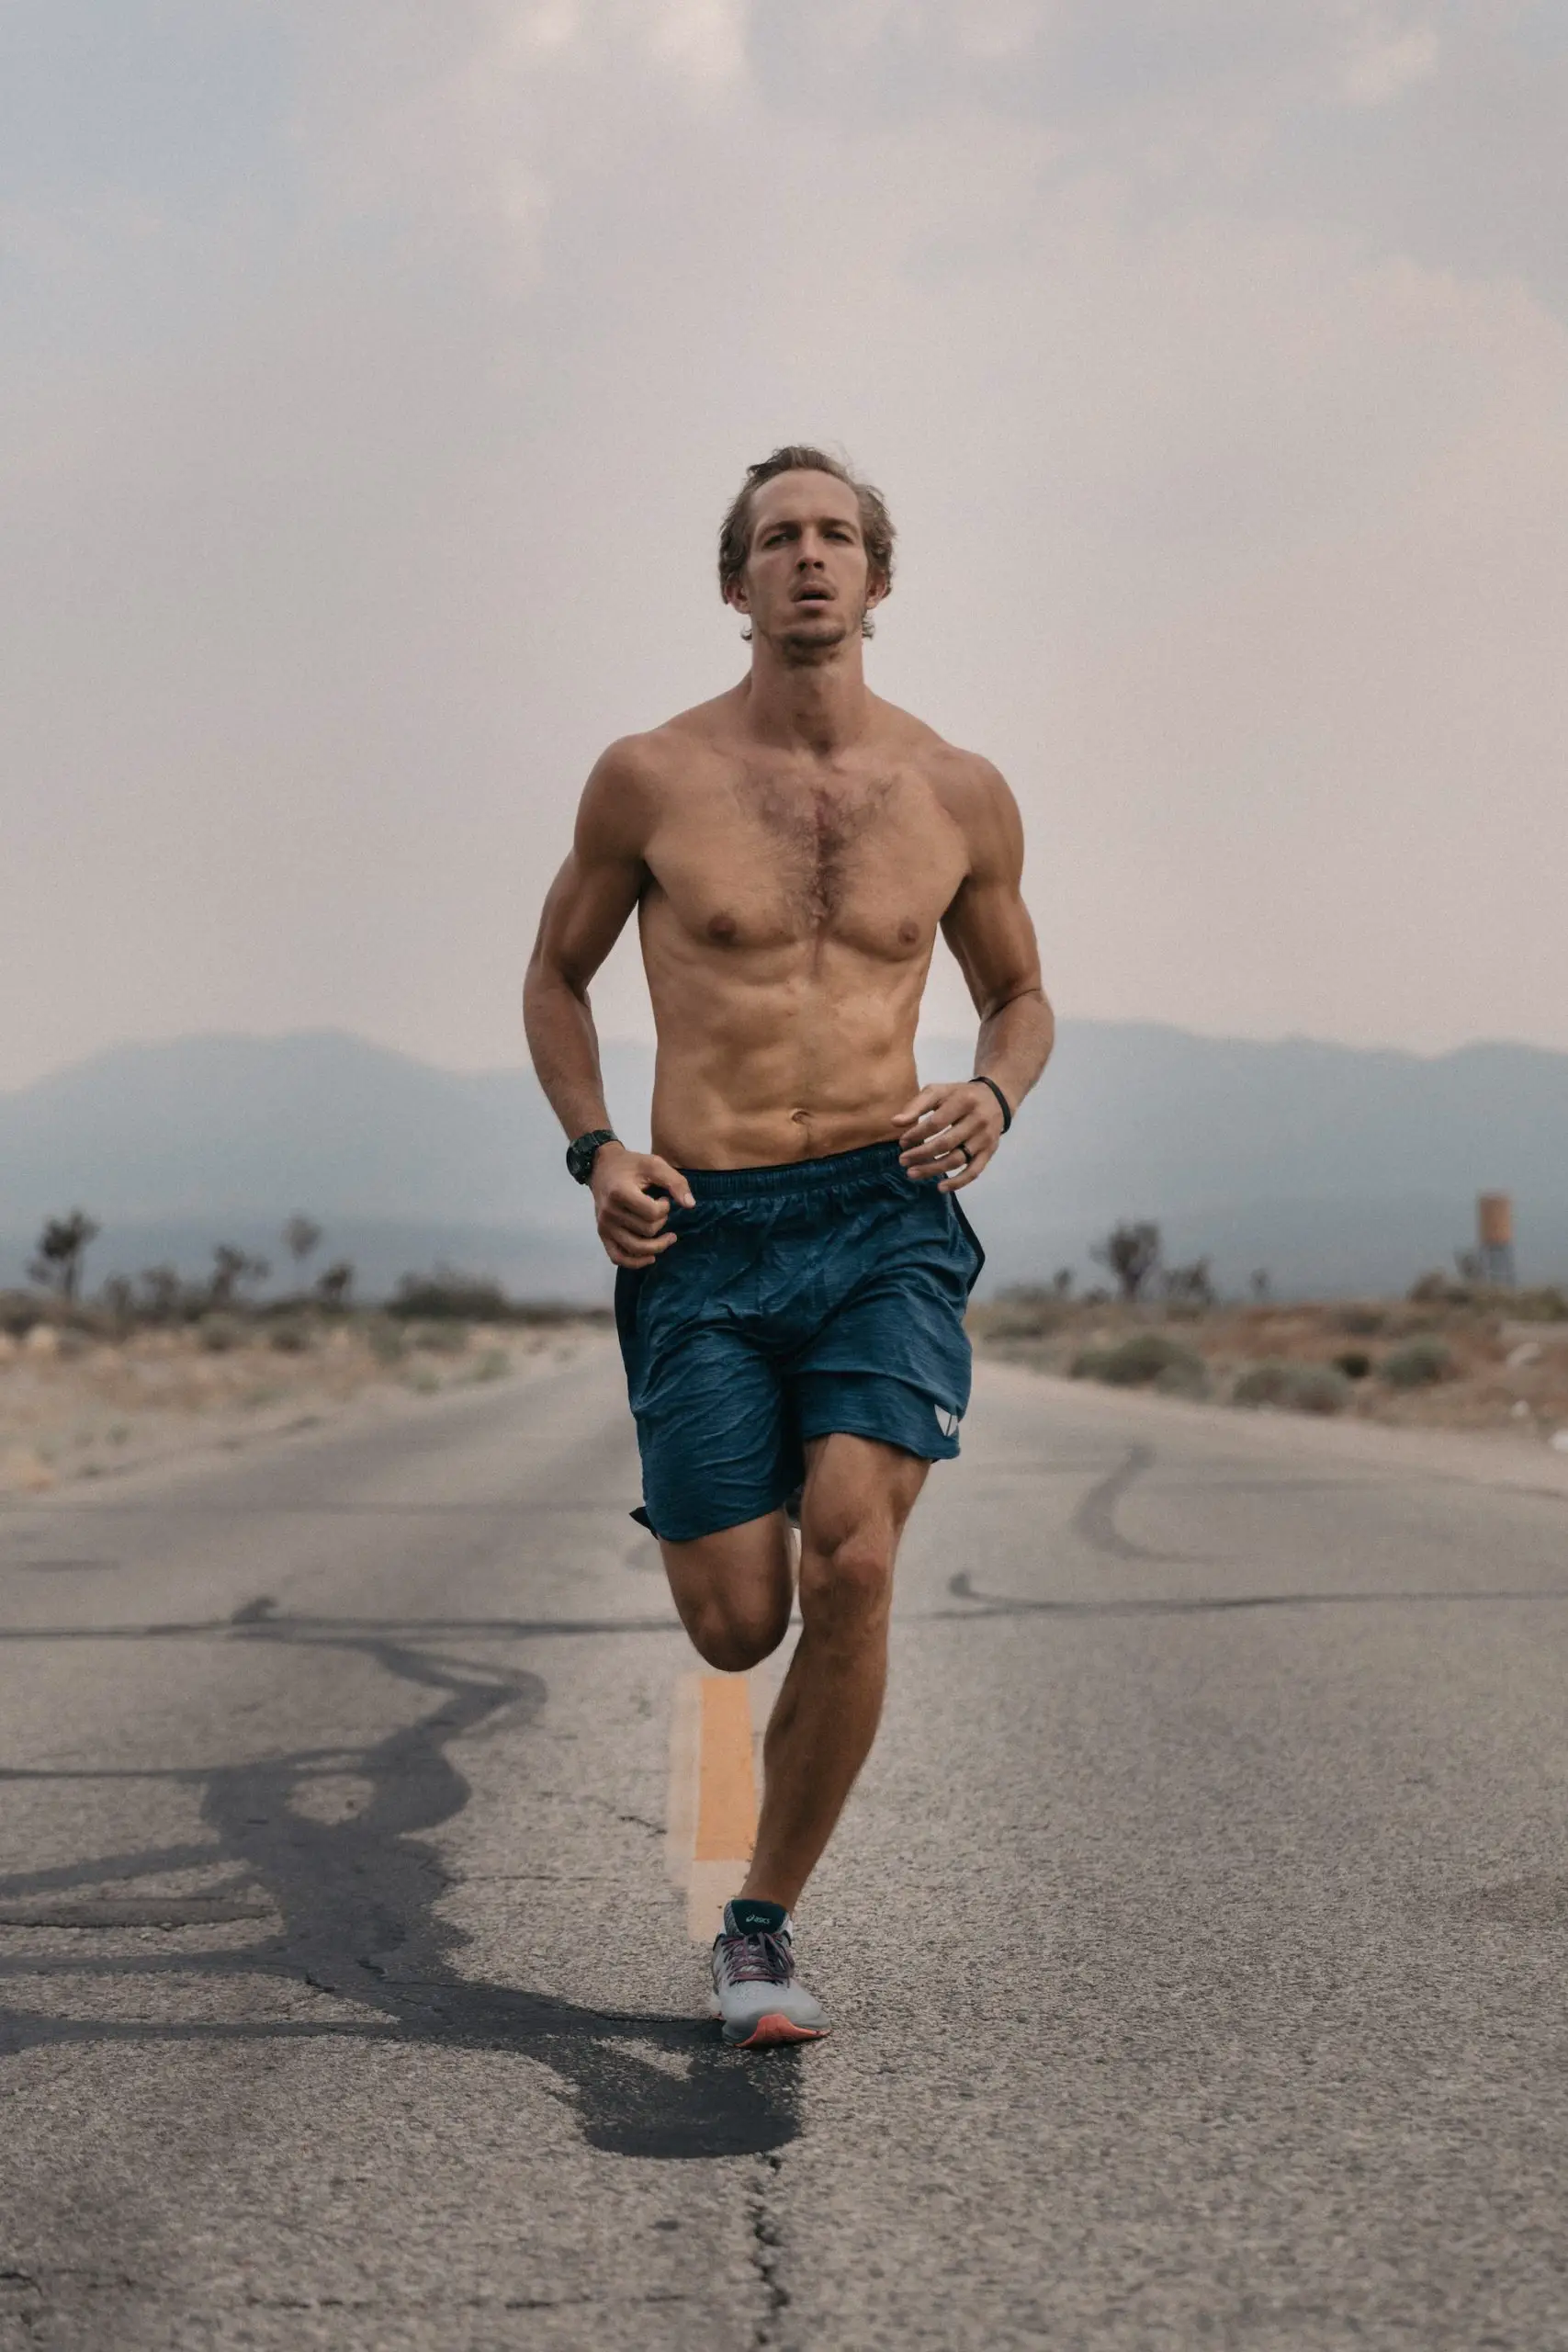 Man running to strengthen his core abs